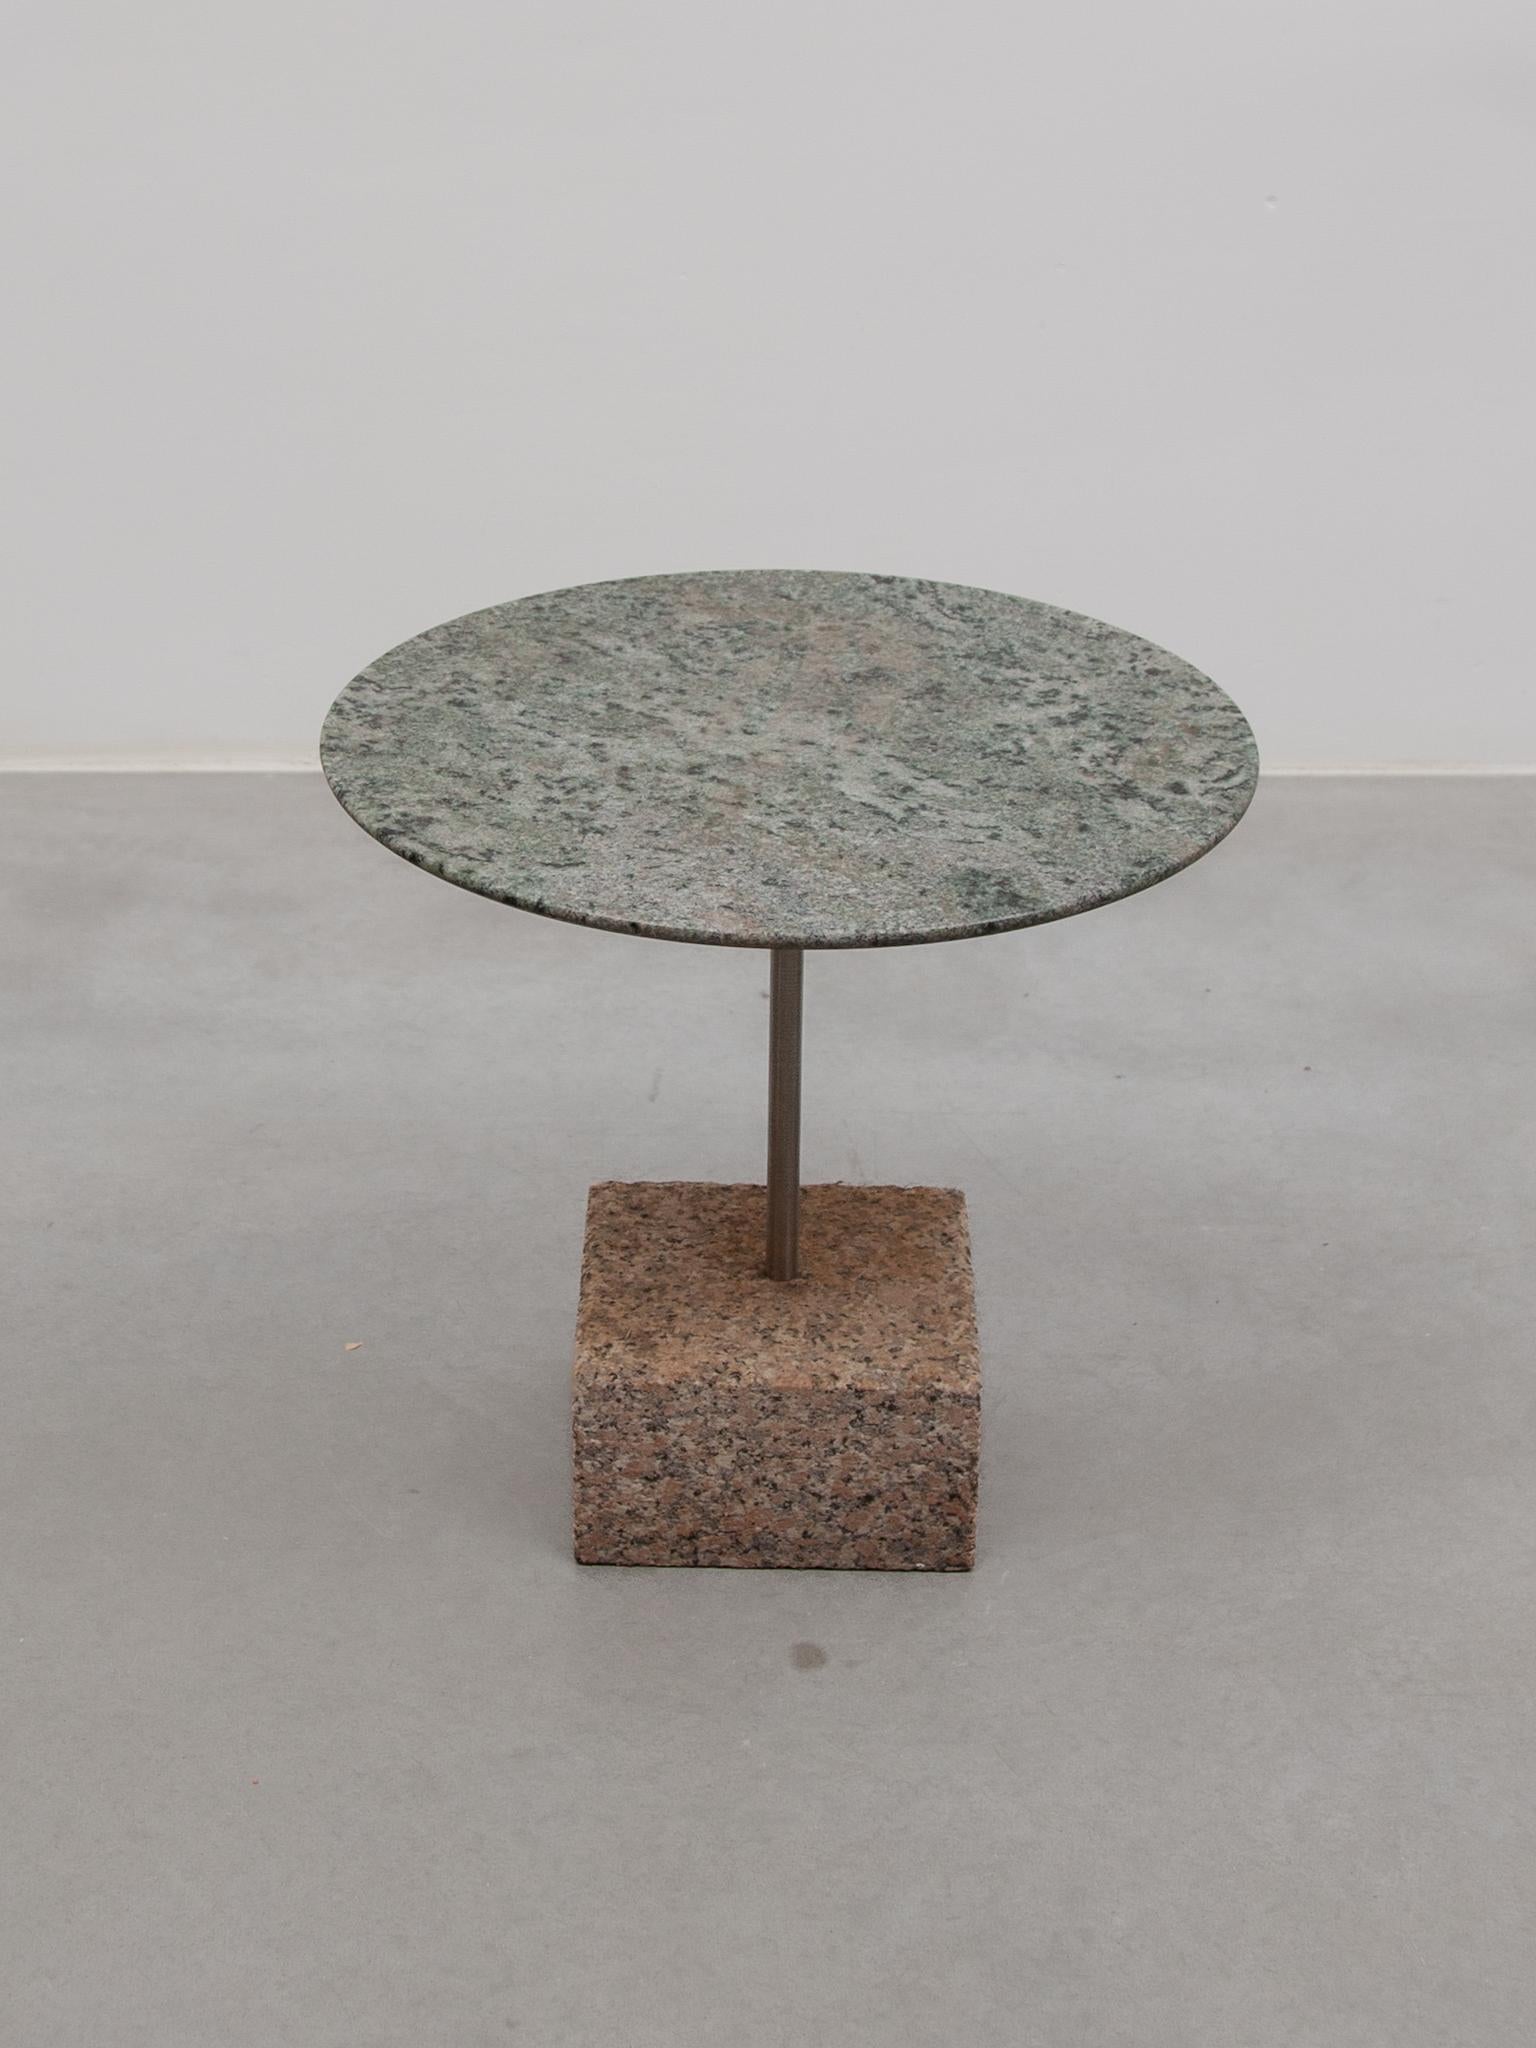 A beautiful brutalist small side table with a natural stone top in veined green and a grey-stone marble base.